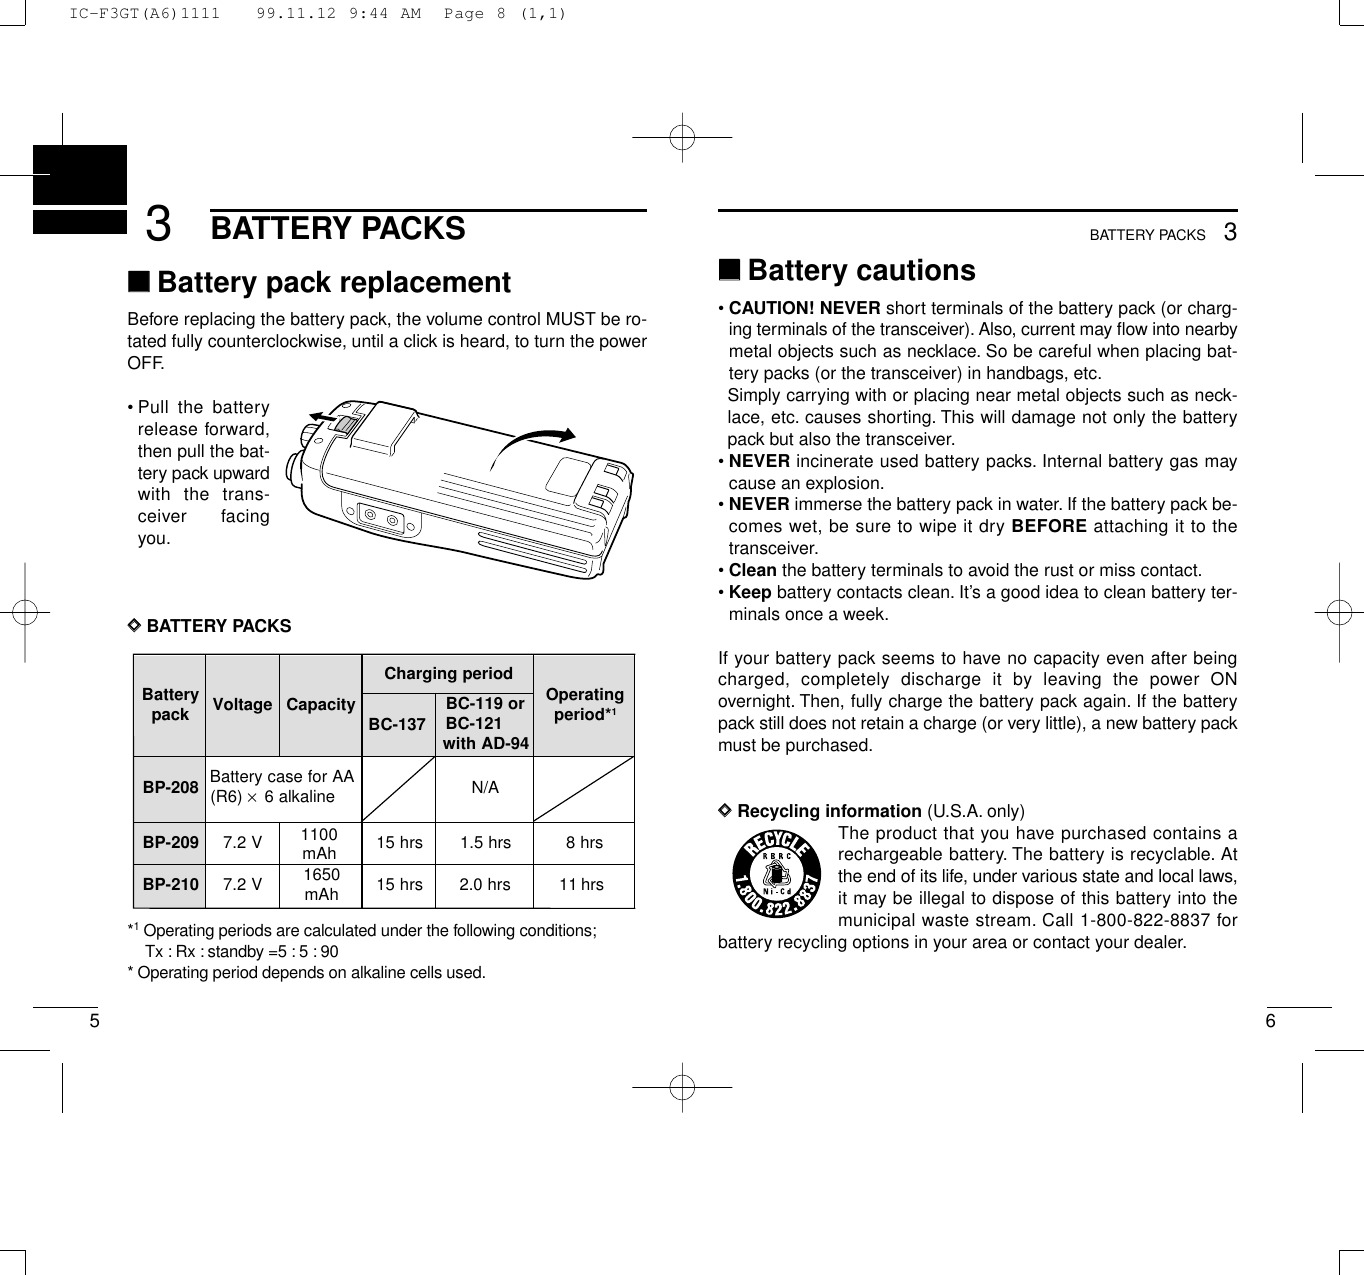 653BATTERY PACKS3BATTERY PACKS‘‘Battery cautions• CAUTION! NEVER short terminals of the battery pack (or charg-ing terminals of the transceiver). Also, current may ﬂow into nearbymetal objects such as necklace. So be careful when placing bat-tery packs (or the transceiver) in handbags, etc.Simply carrying with or placing near metal objects such as neck-lace, etc. causes shorting. This will damage not only the batterypack but also the transceiver.• NEVER incinerate used battery packs. Internal battery gas maycause an explosion.• NEVER immerse the battery pack in water. If the battery pack be-comes wet, be sure to wipe it dry BEFORE attaching it to thetransceiver.• Clean the battery terminals to avoid the rust or miss contact.• Keep battery contacts clean. It’s a good idea to clean battery ter-minals once a week.If your battery pack seems to have no capacity even after beingcharged, completely discharge it by leaving the power ONovernight. Then, fully charge the battery pack again. If the batterypack still does not retain a charge (or very little), a new battery packmust be purchased.DDRecycling information (U.S.A. only)The product that you have purchased contains arechargeable battery. The battery is recyclable. Atthe end of its life, under various state and local laws,it may be illegal to dispose of this battery into themunicipal waste stream. Call 1-800-822-8837 forbattery recycling options in your area or contact your dealer.‘‘Battery pack replacementBefore replacing the battery pack, the volume control MUST be ro-tated fully counterclockwise, until a click is heard, to turn the powerOFF.• Pull the batteryrelease forward,then pull the bat-tery pack upwardwith the trans-ceiver facingyou.DDBATTERY PACKS*1Operating periods are calculated under the following conditions;Tx : Rx : standby =5 : 5 : 90* Operating period depends on alkaline cells used.yrettaB kcap egatloV yticapaCdoirepgnigrahC gnitarepO *doirep1BC-137ro911-CB 121-CB 49-DAhtiw802-PB AArofesacyrettaB)6R( ×enilakla6 A/N902-PB V2.71100srh51srh5.1srh8012-PB V2.7 0561 hAm srh51srh0.2srh111100mAhIC-F3GT(A6)1111   99.11.12 9:44 AM  Page 8 (1,1)